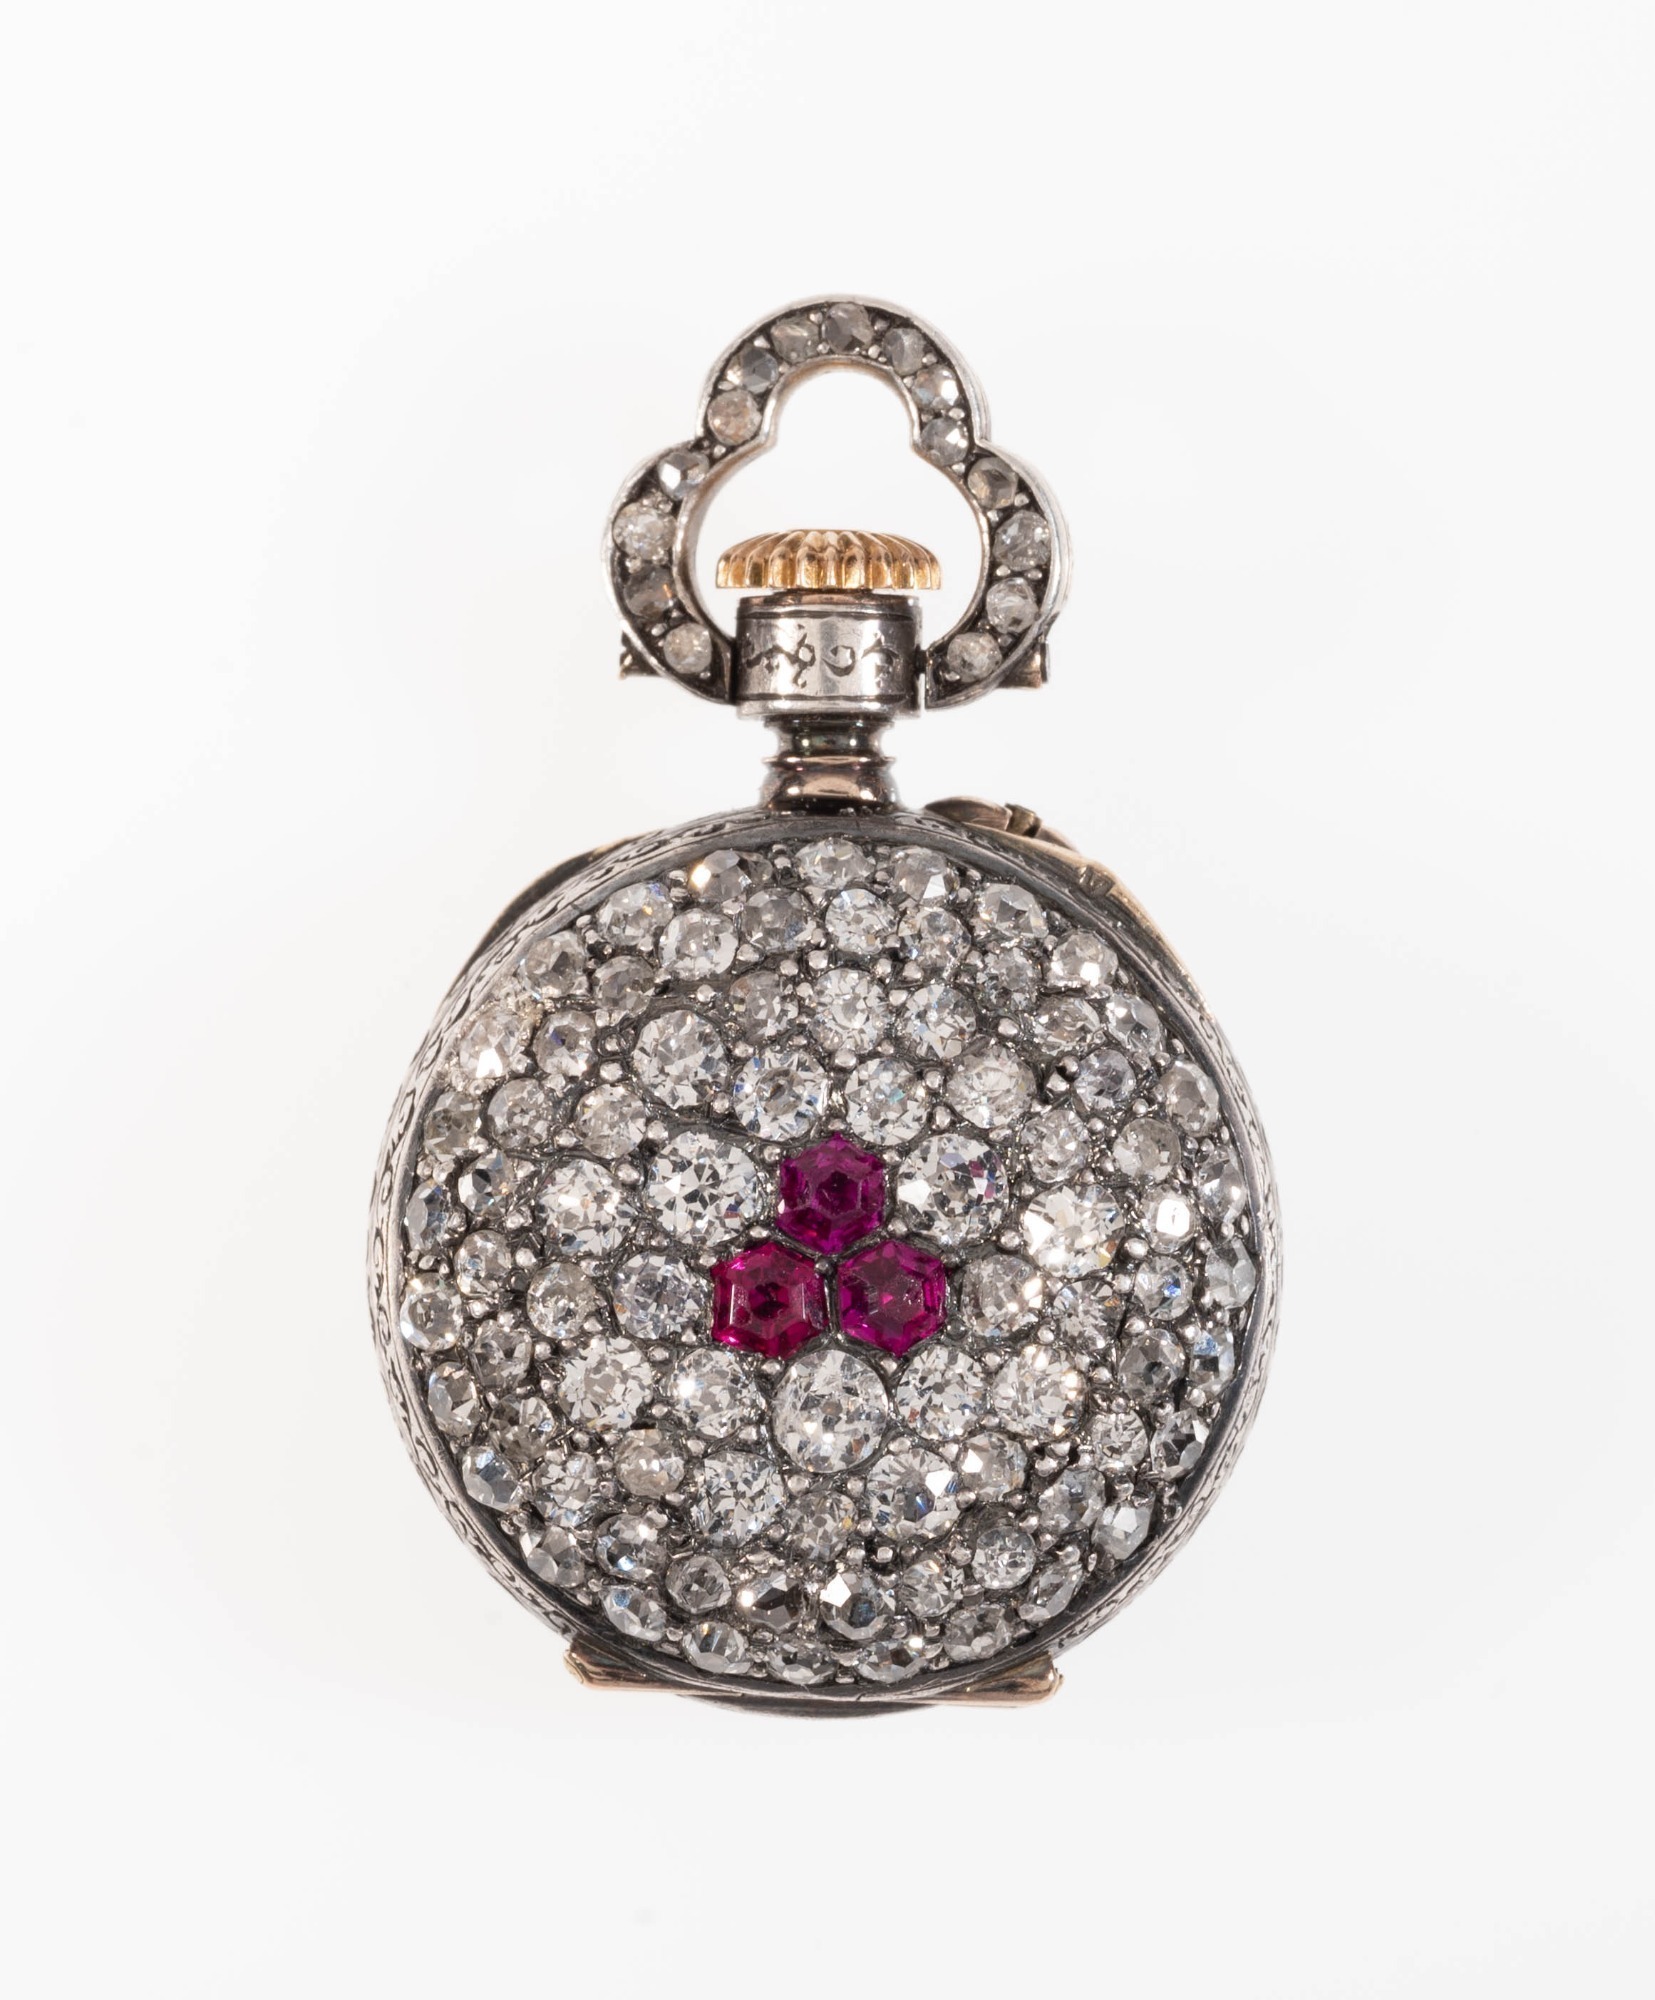 LECOULTRE DIAMOND AND RUBY MINIATURE PENDANT WATCH